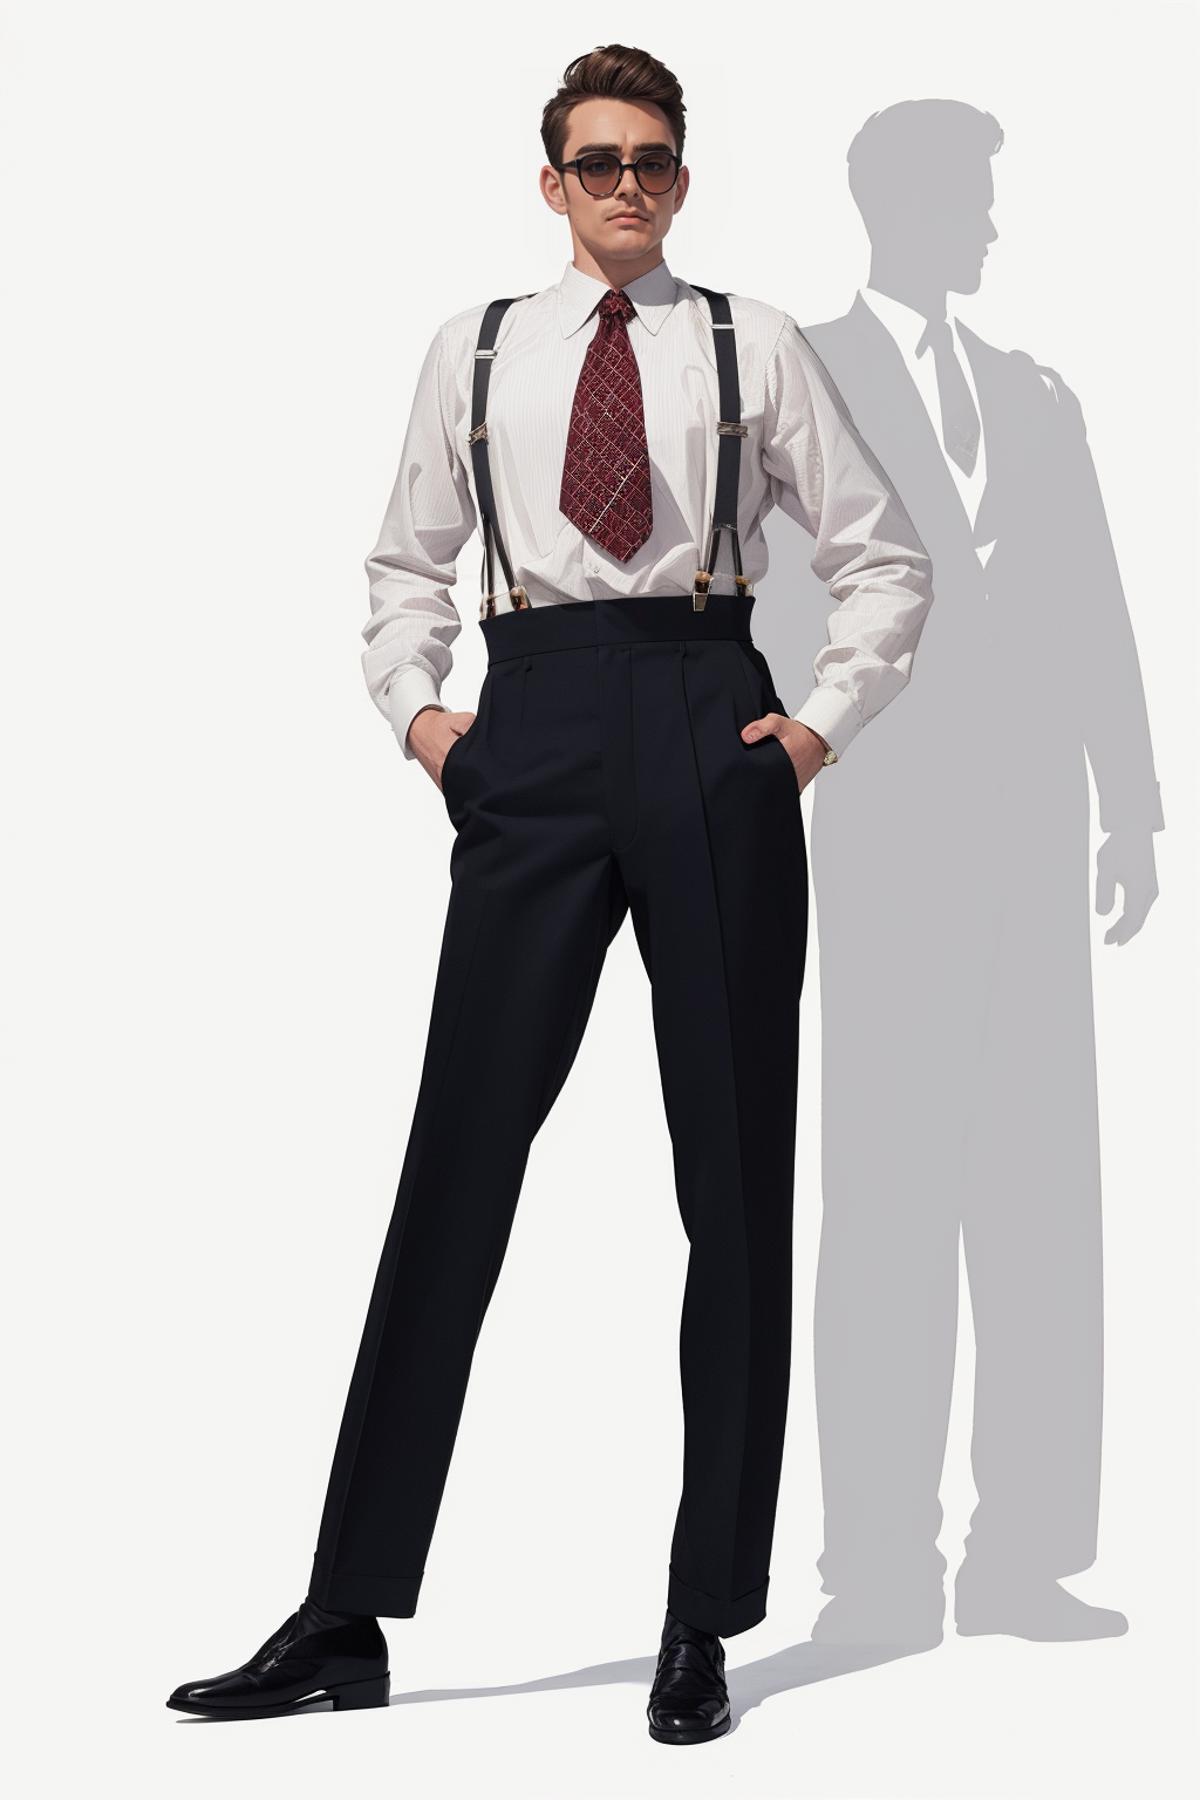 Man wearing a white shirt, tie, and suspenders.